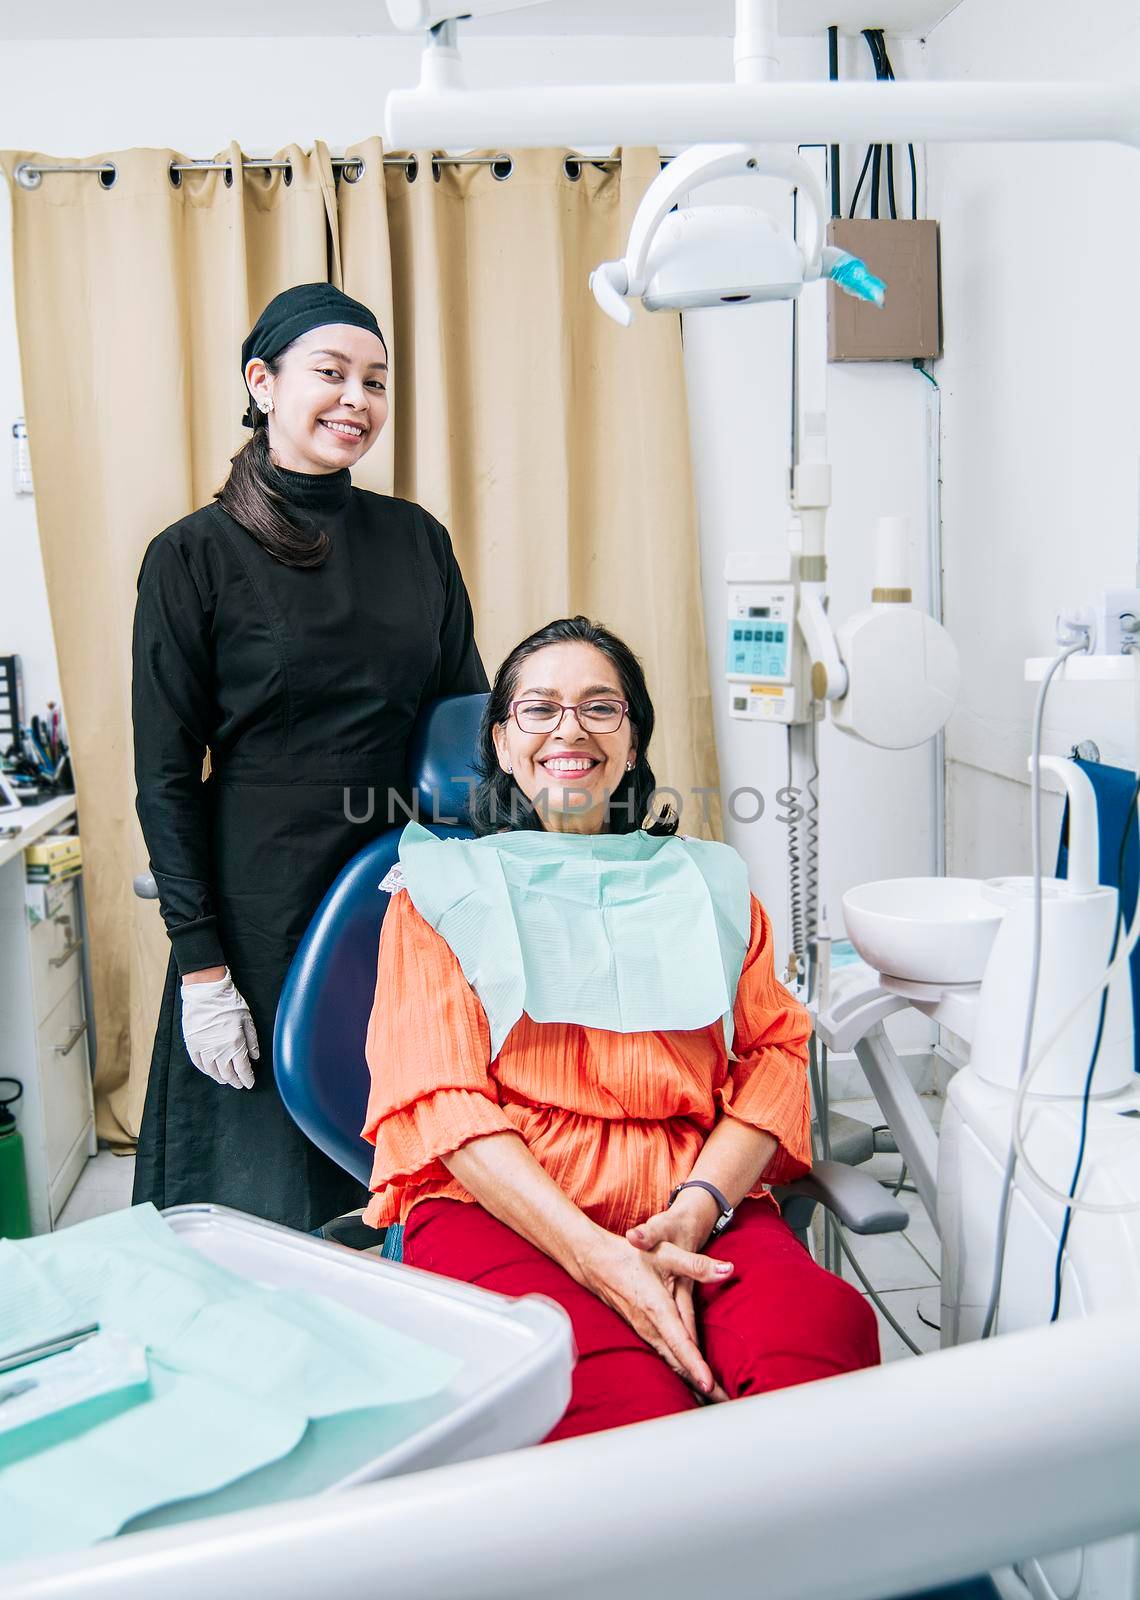 Dentist with patient smiling at camera in office, satisfied dentist and patient smiling at camera, satisfied dentist and patient concept by isaiphoto